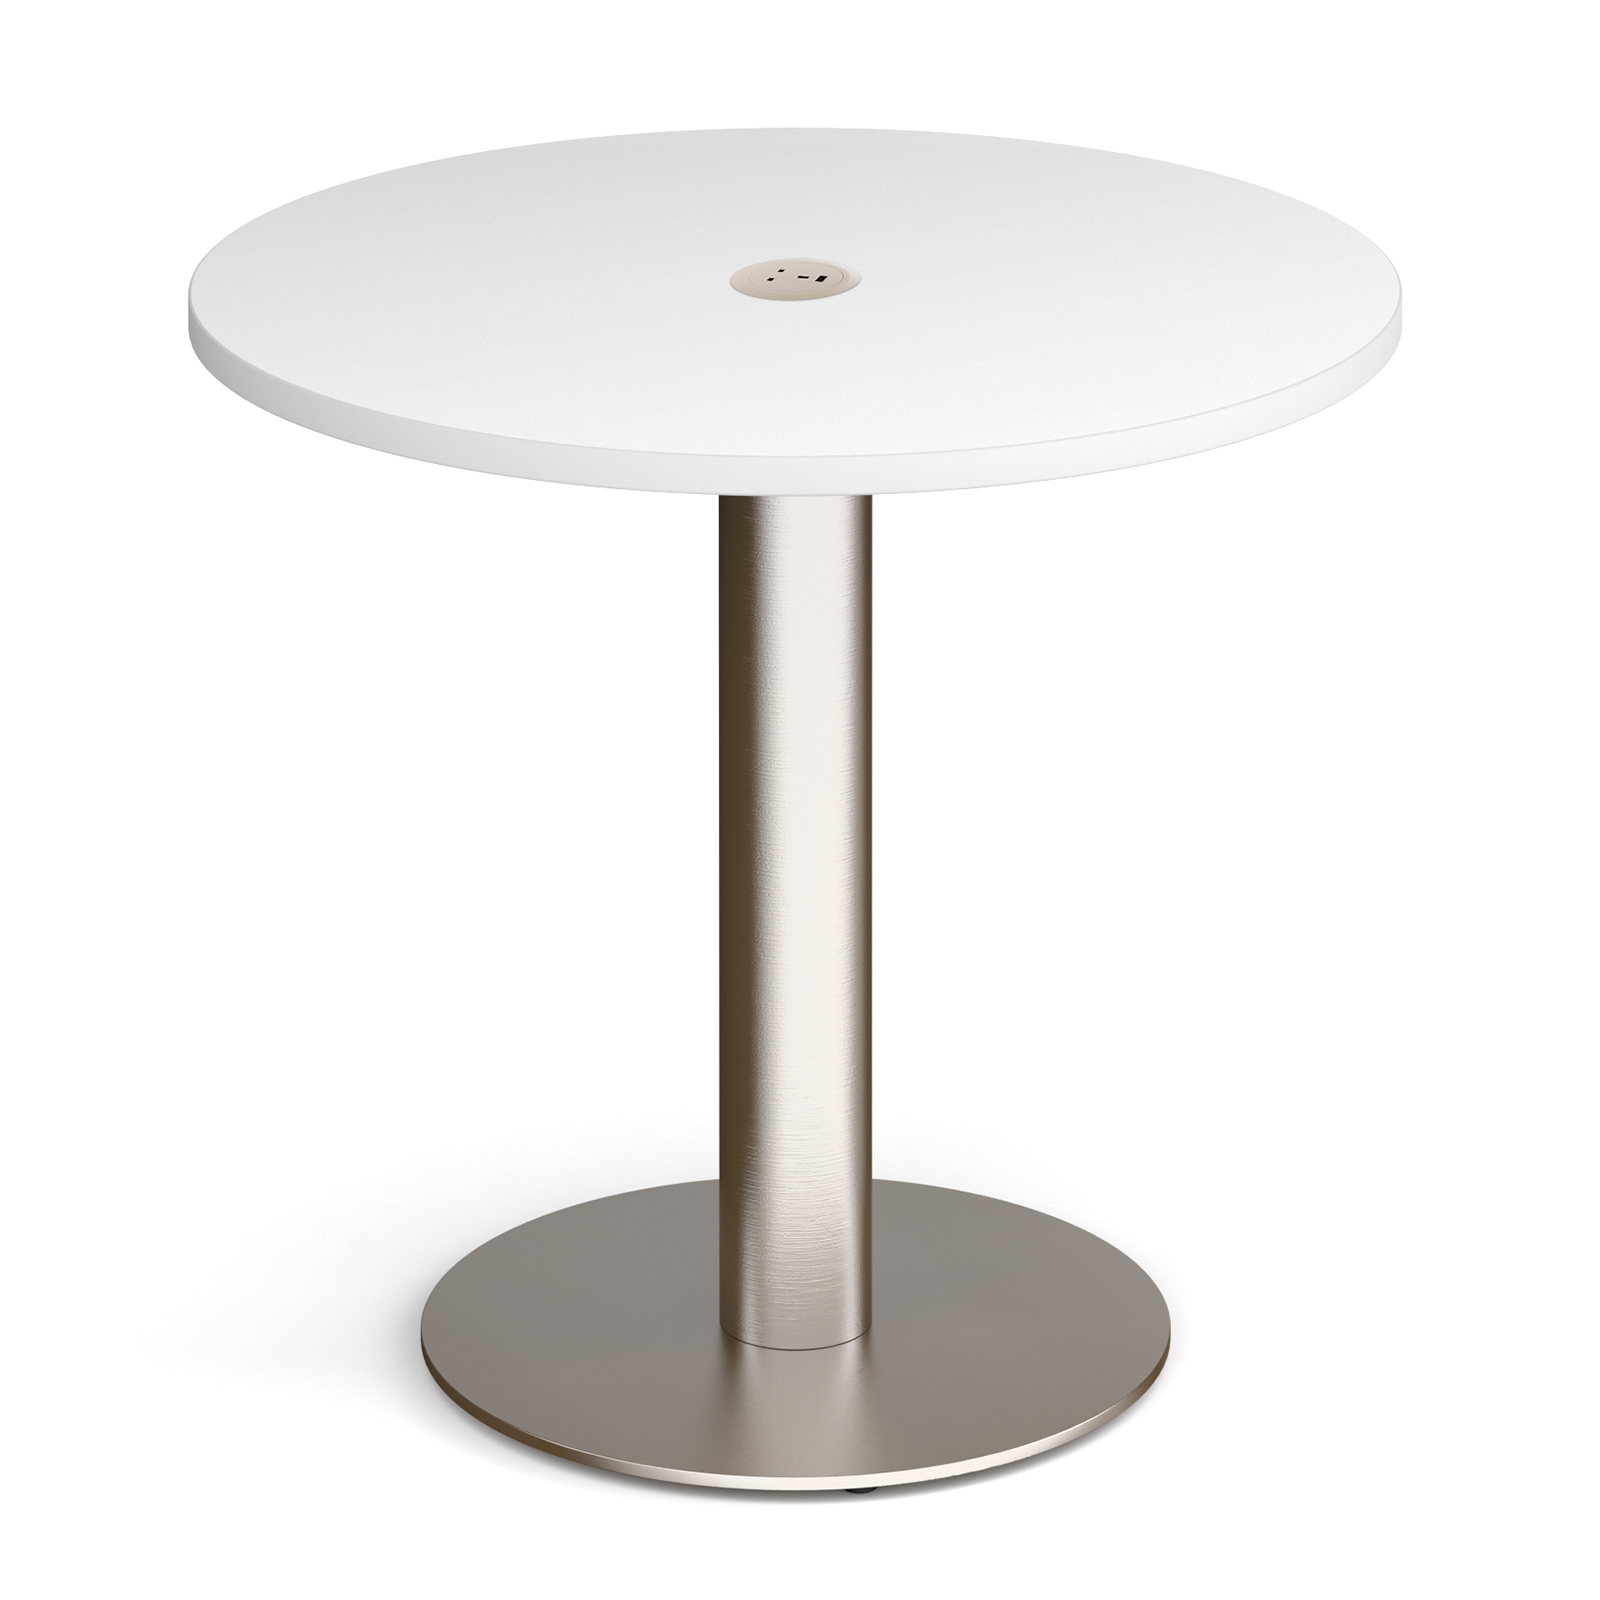 Boardroom / Meeting Monza circular dining table 800mm in white with central circular cutout and Ion power module in white